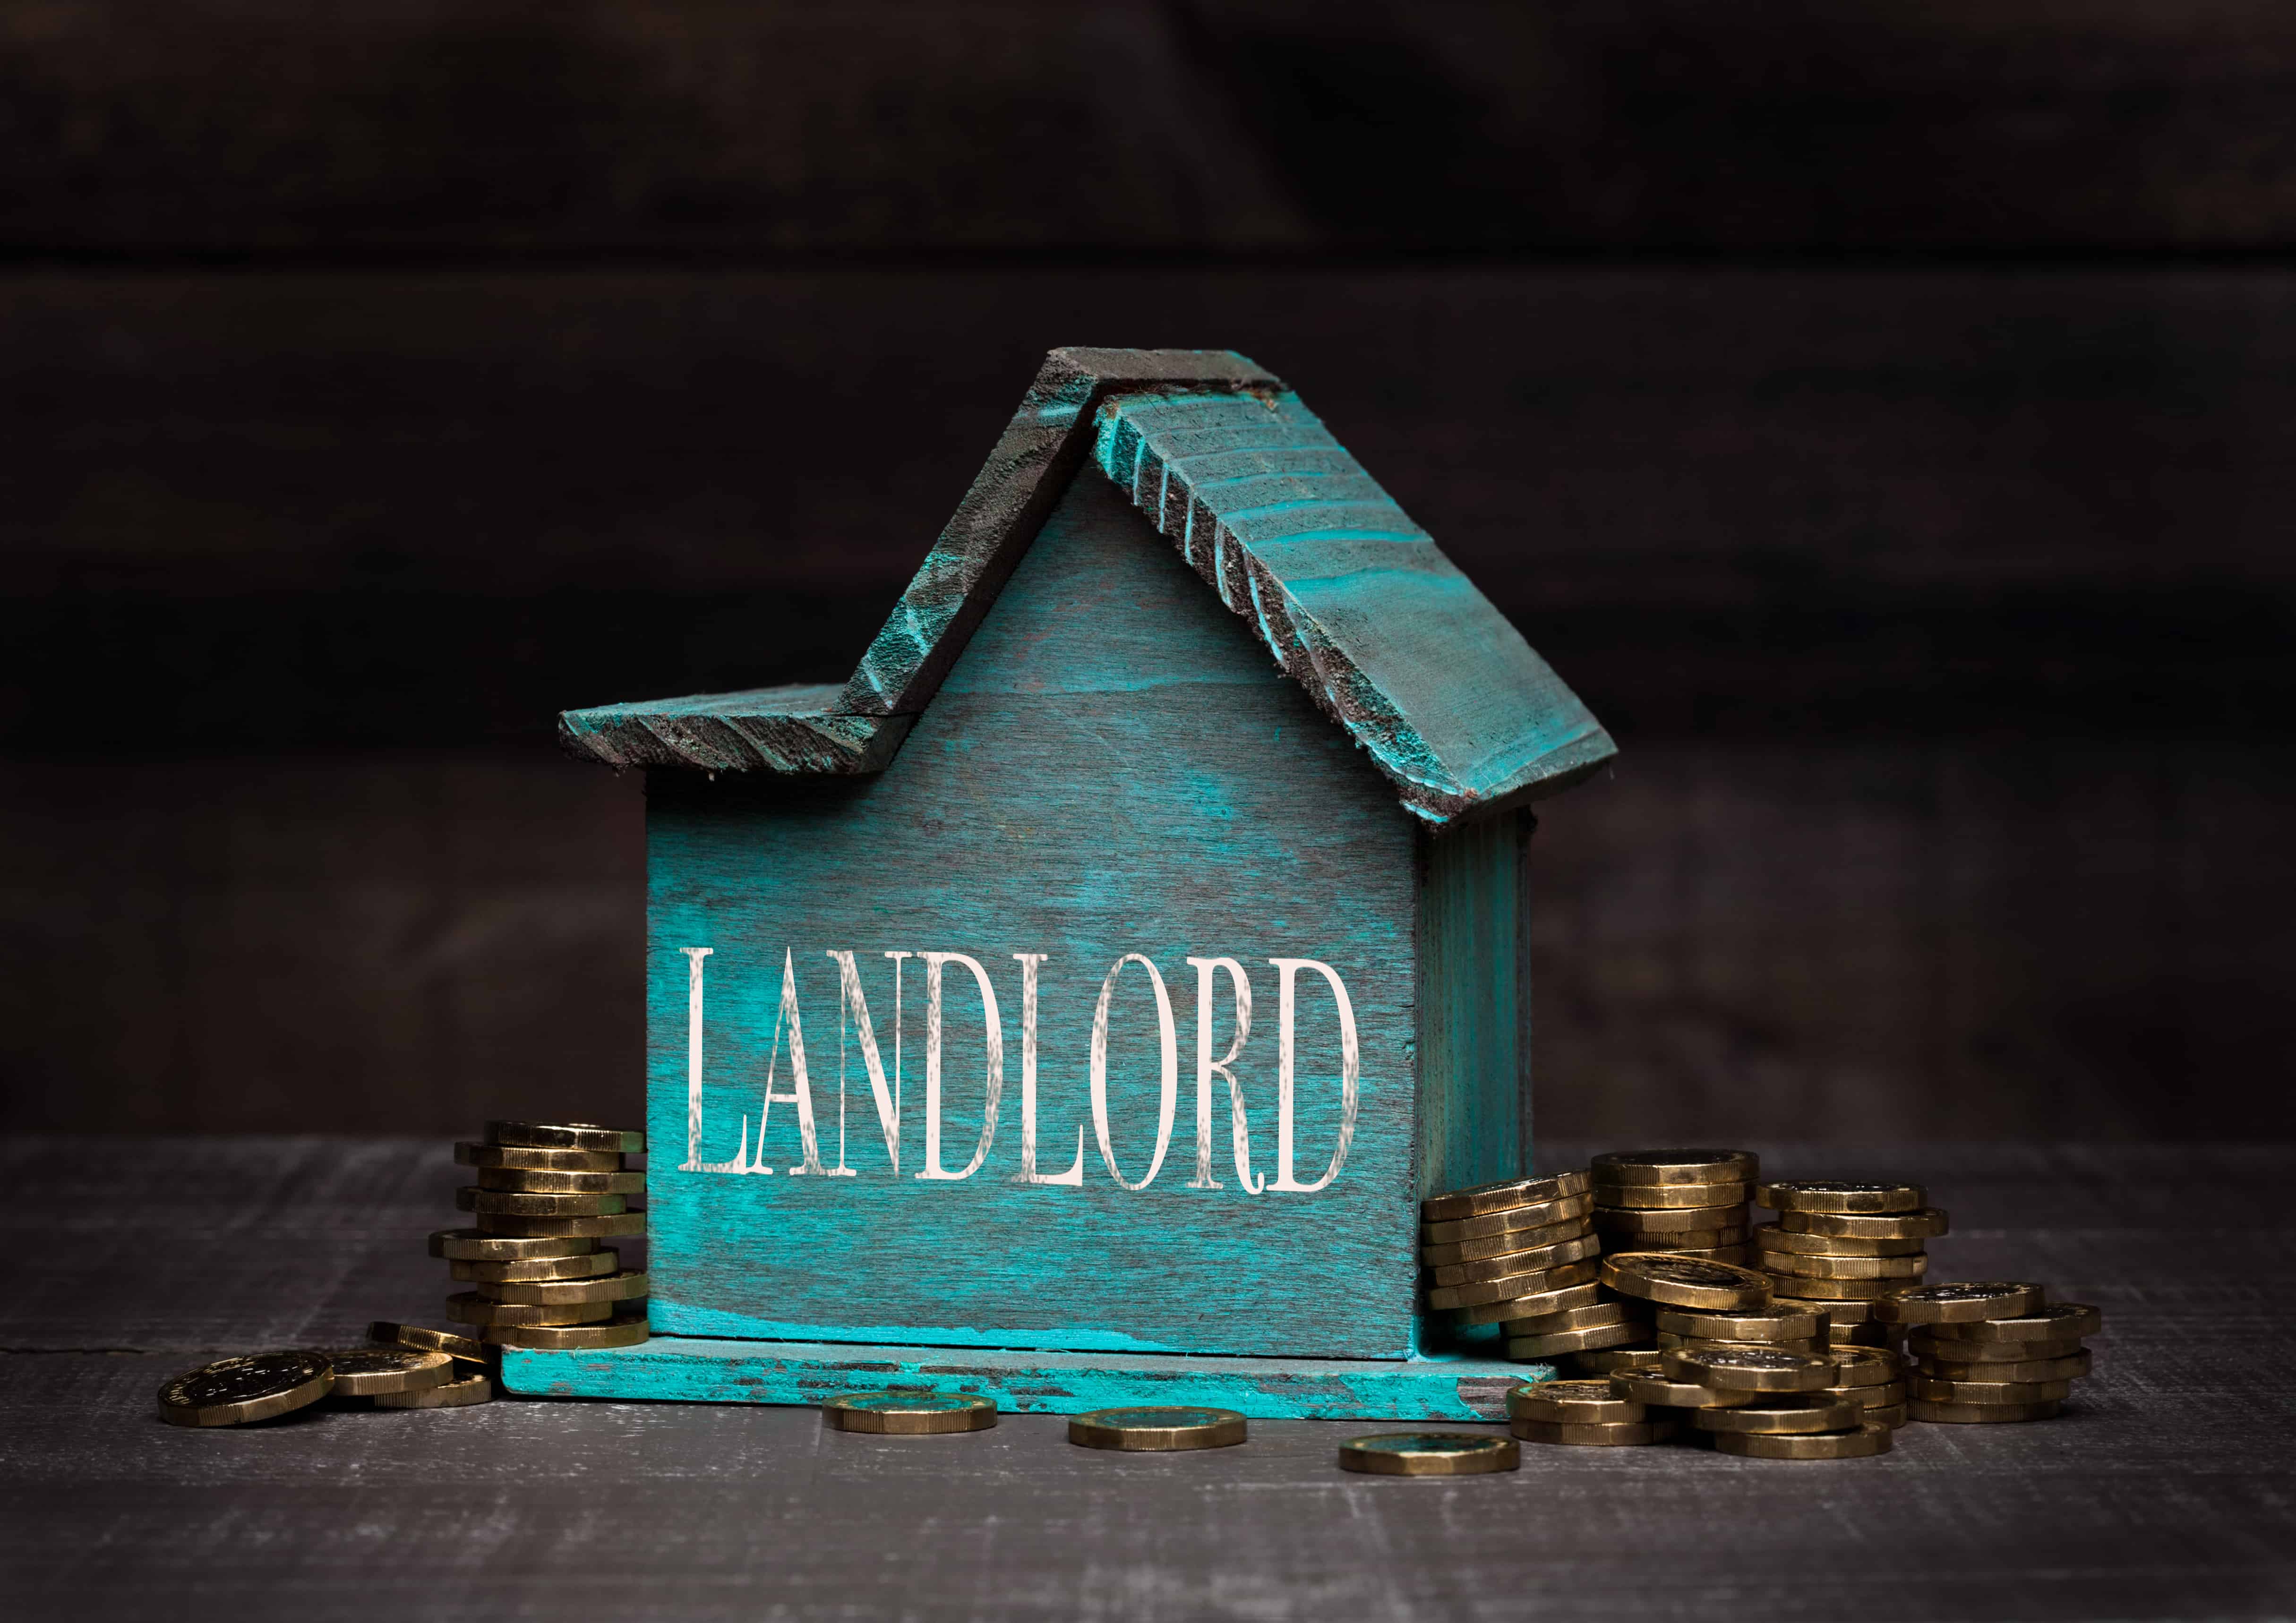 Court action landlord repossessions decline by 67%